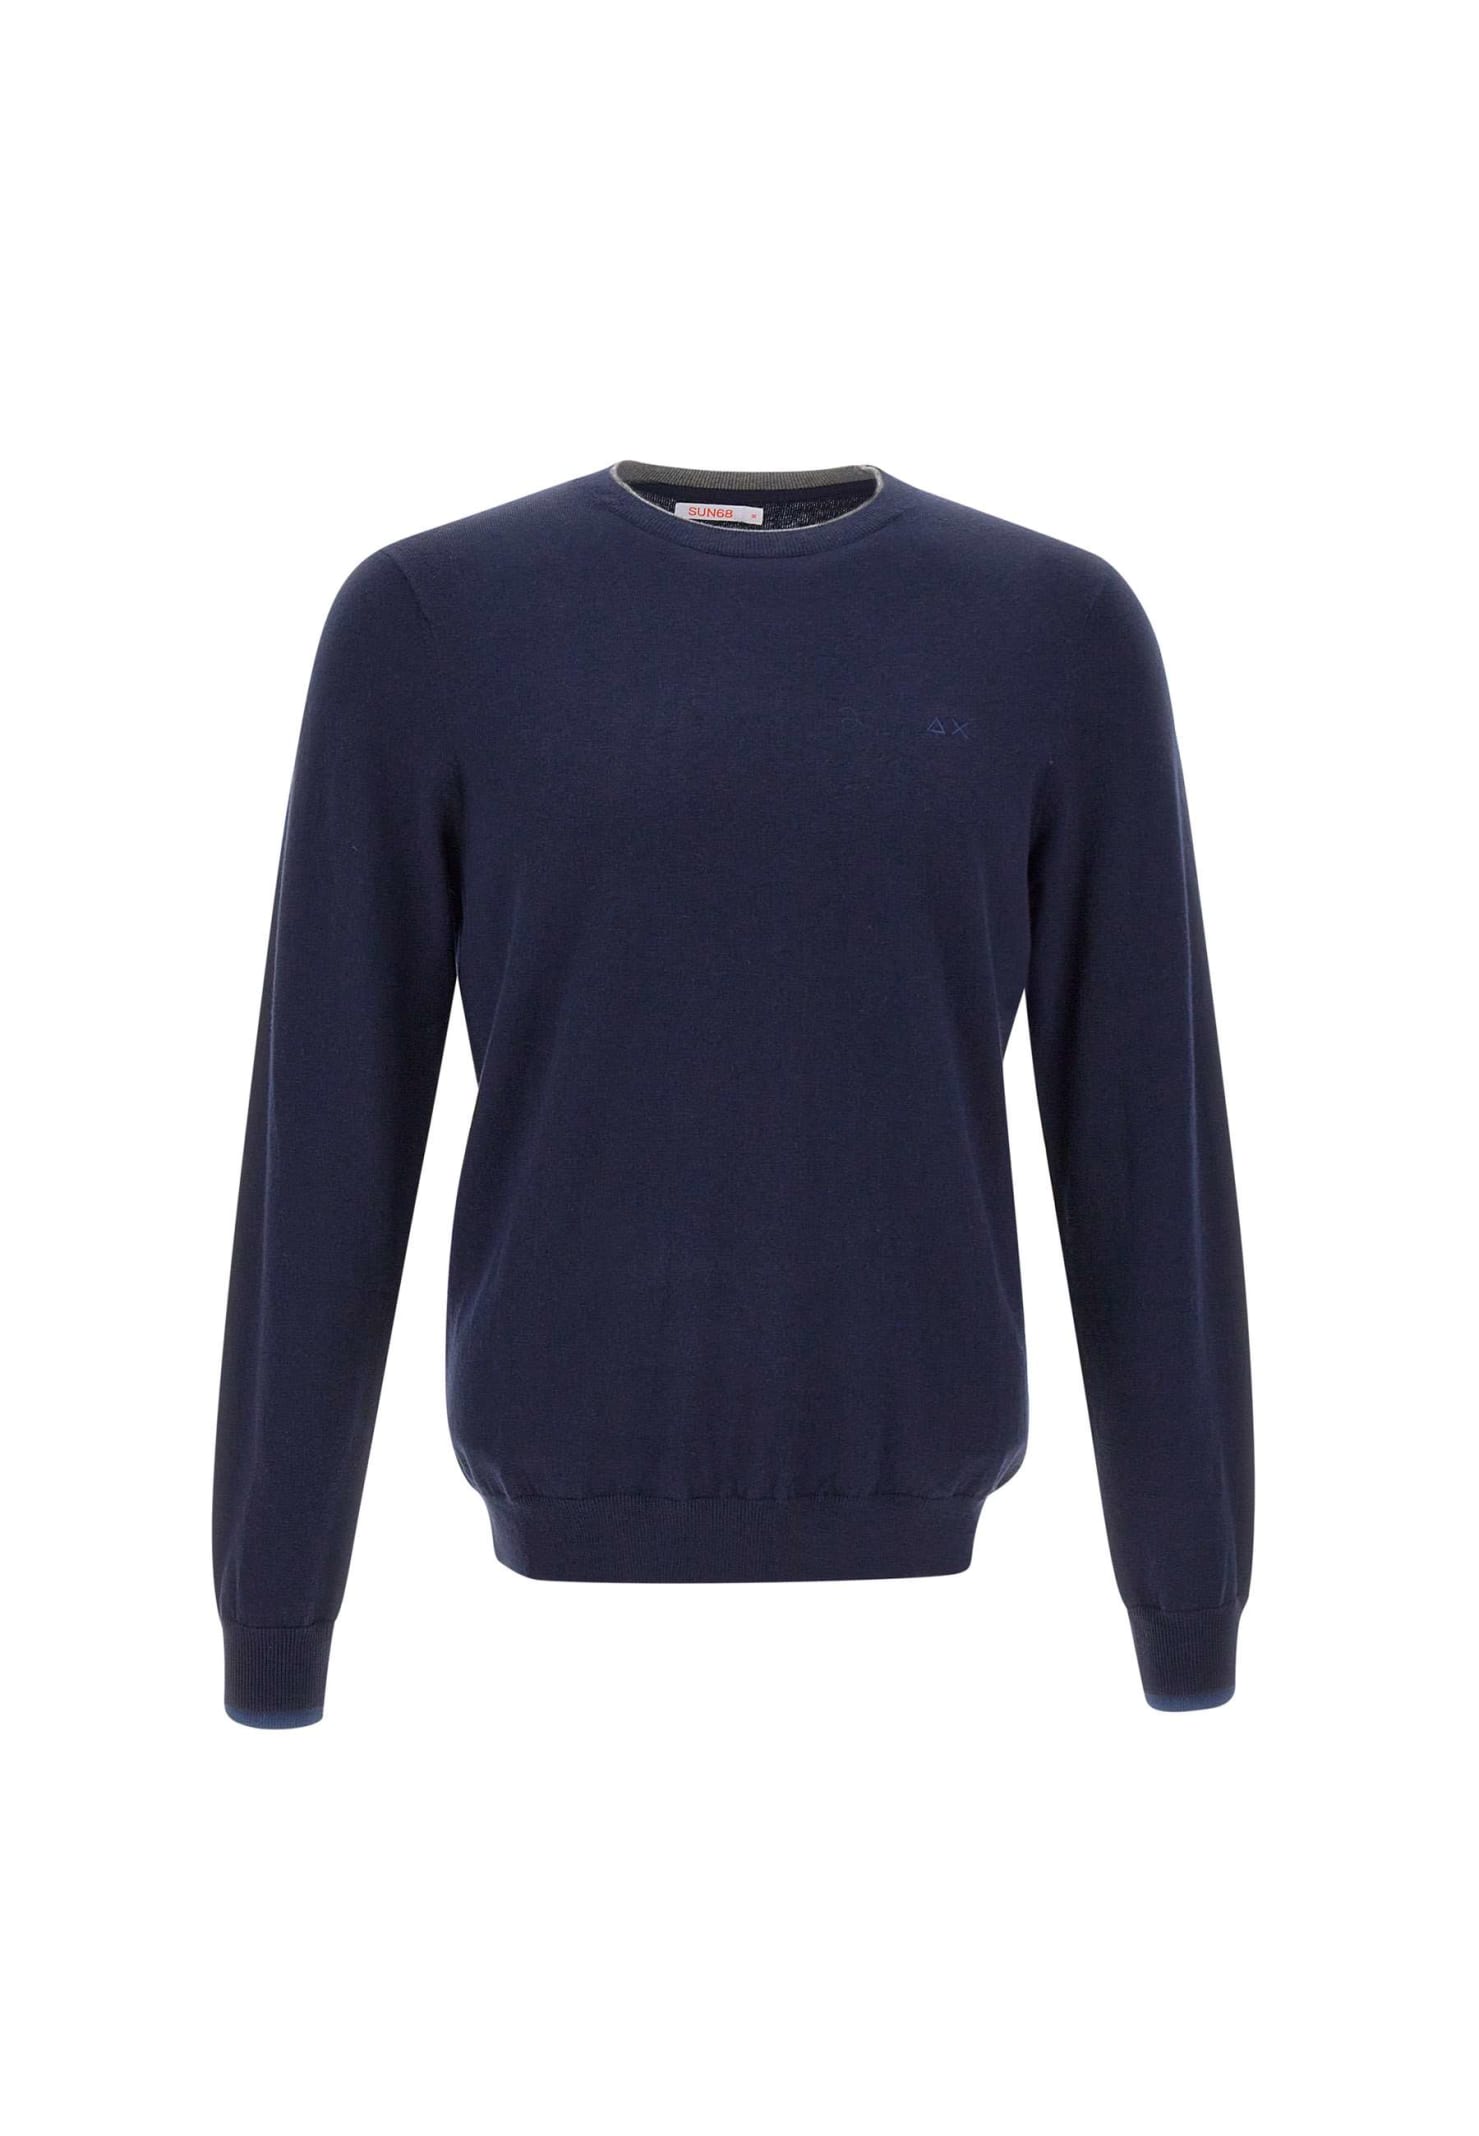 Sun 68 round Double Cotton And Wool Pullover Sweater